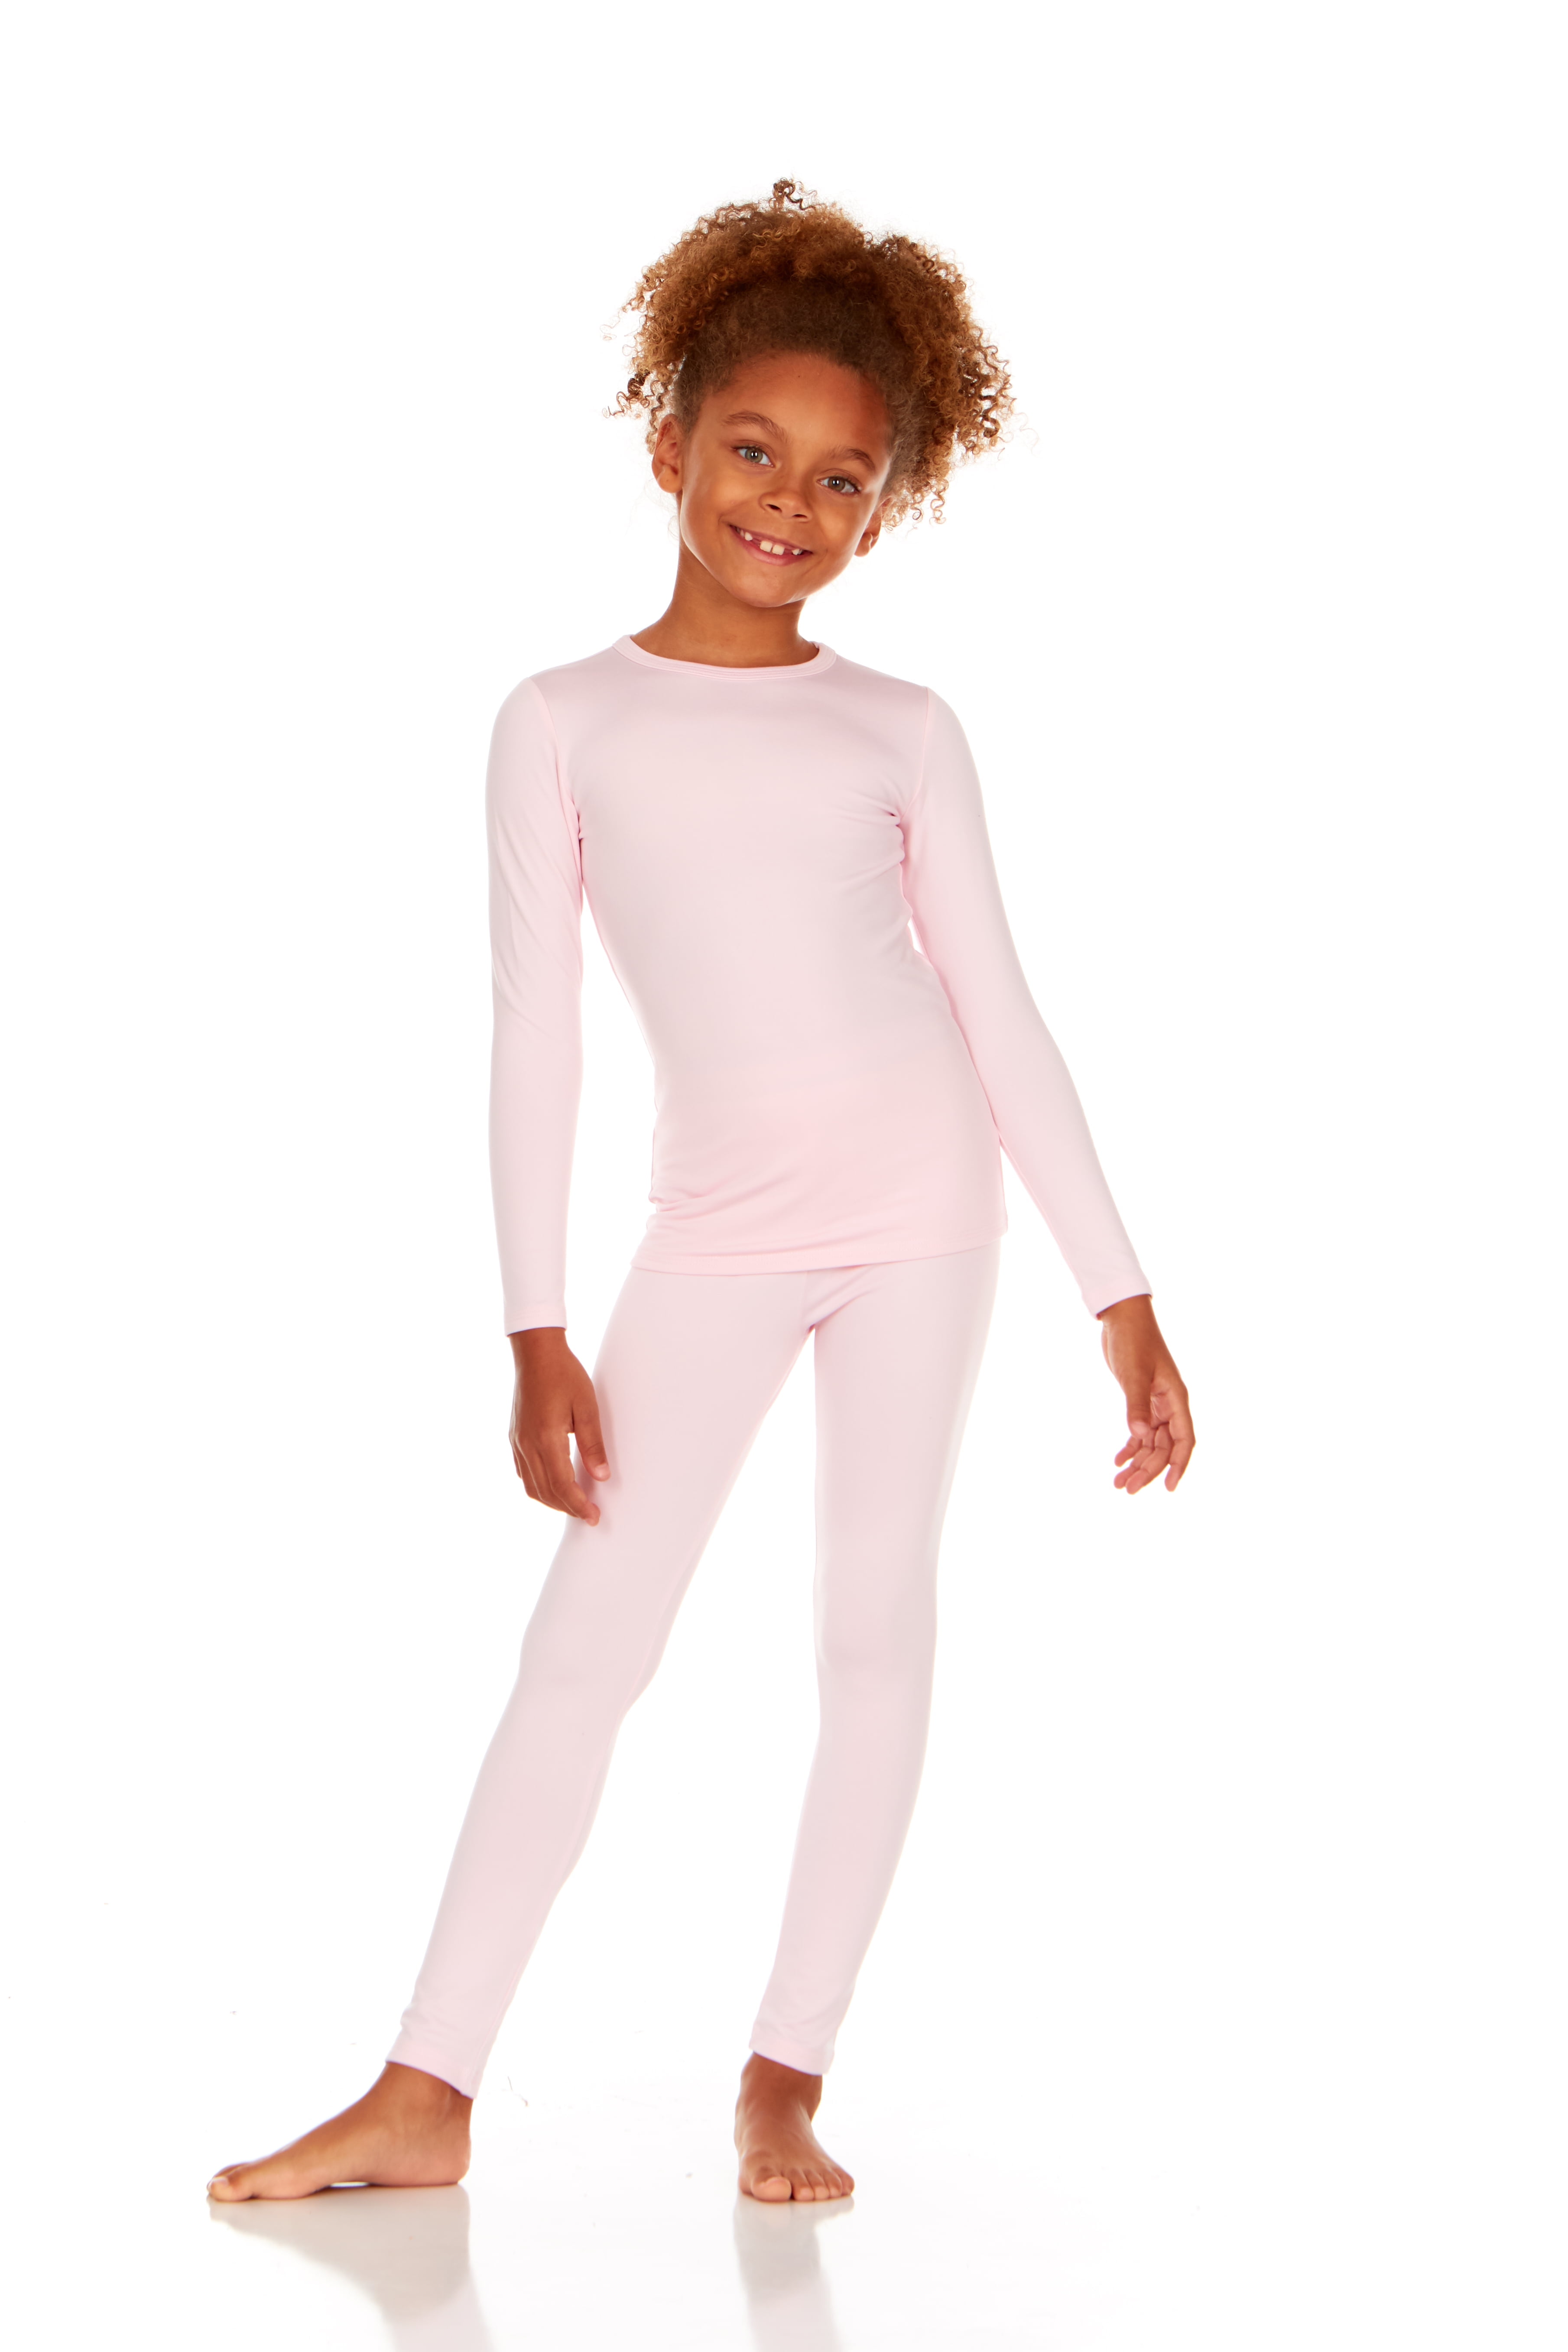 Thermajane Girl's Ultra Soft Thermal Underwear Long Johns Set with Fleece  Lined (Baby Pink, X-Small)